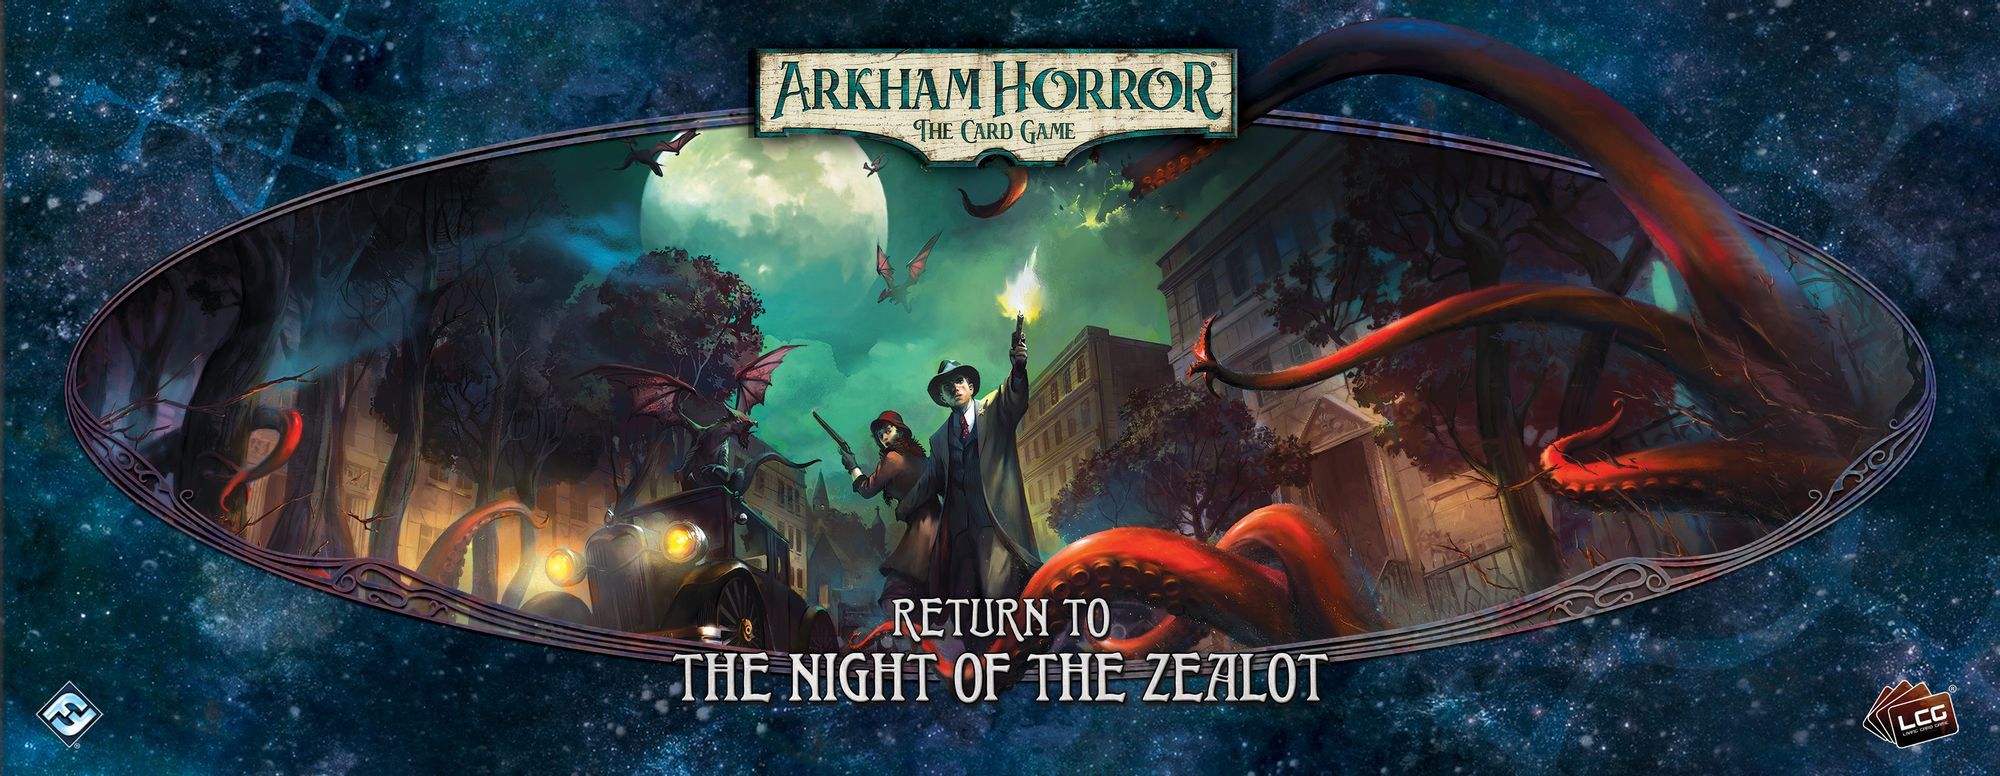 ПНП: Arkham Horror: The Card Game – Return to the Night of the Zealot